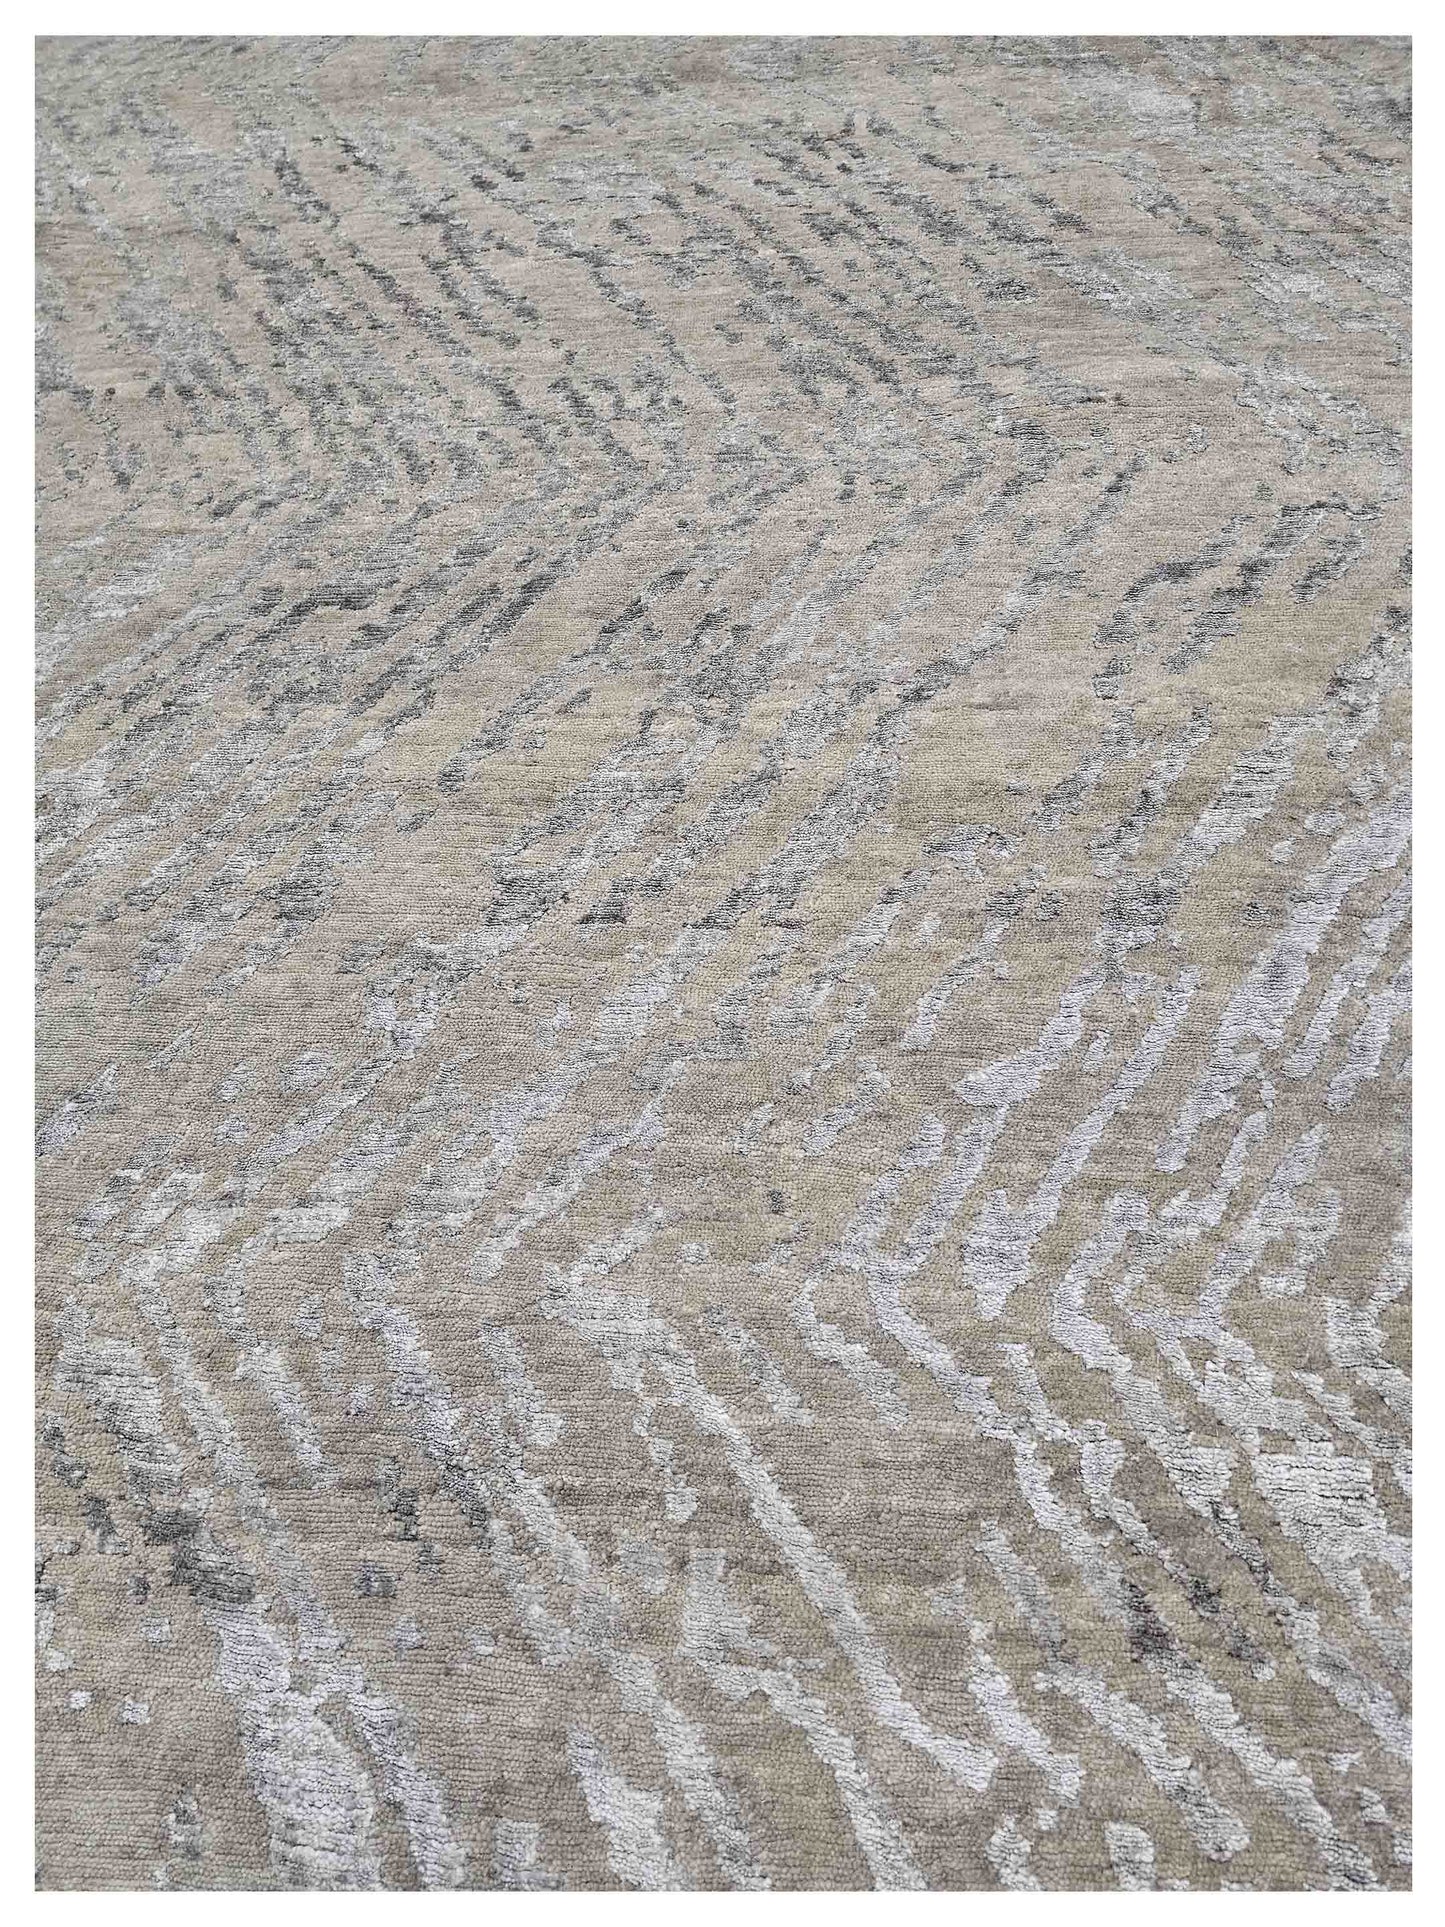 Artisan Toni  Flax  Transitional Knotted Rug